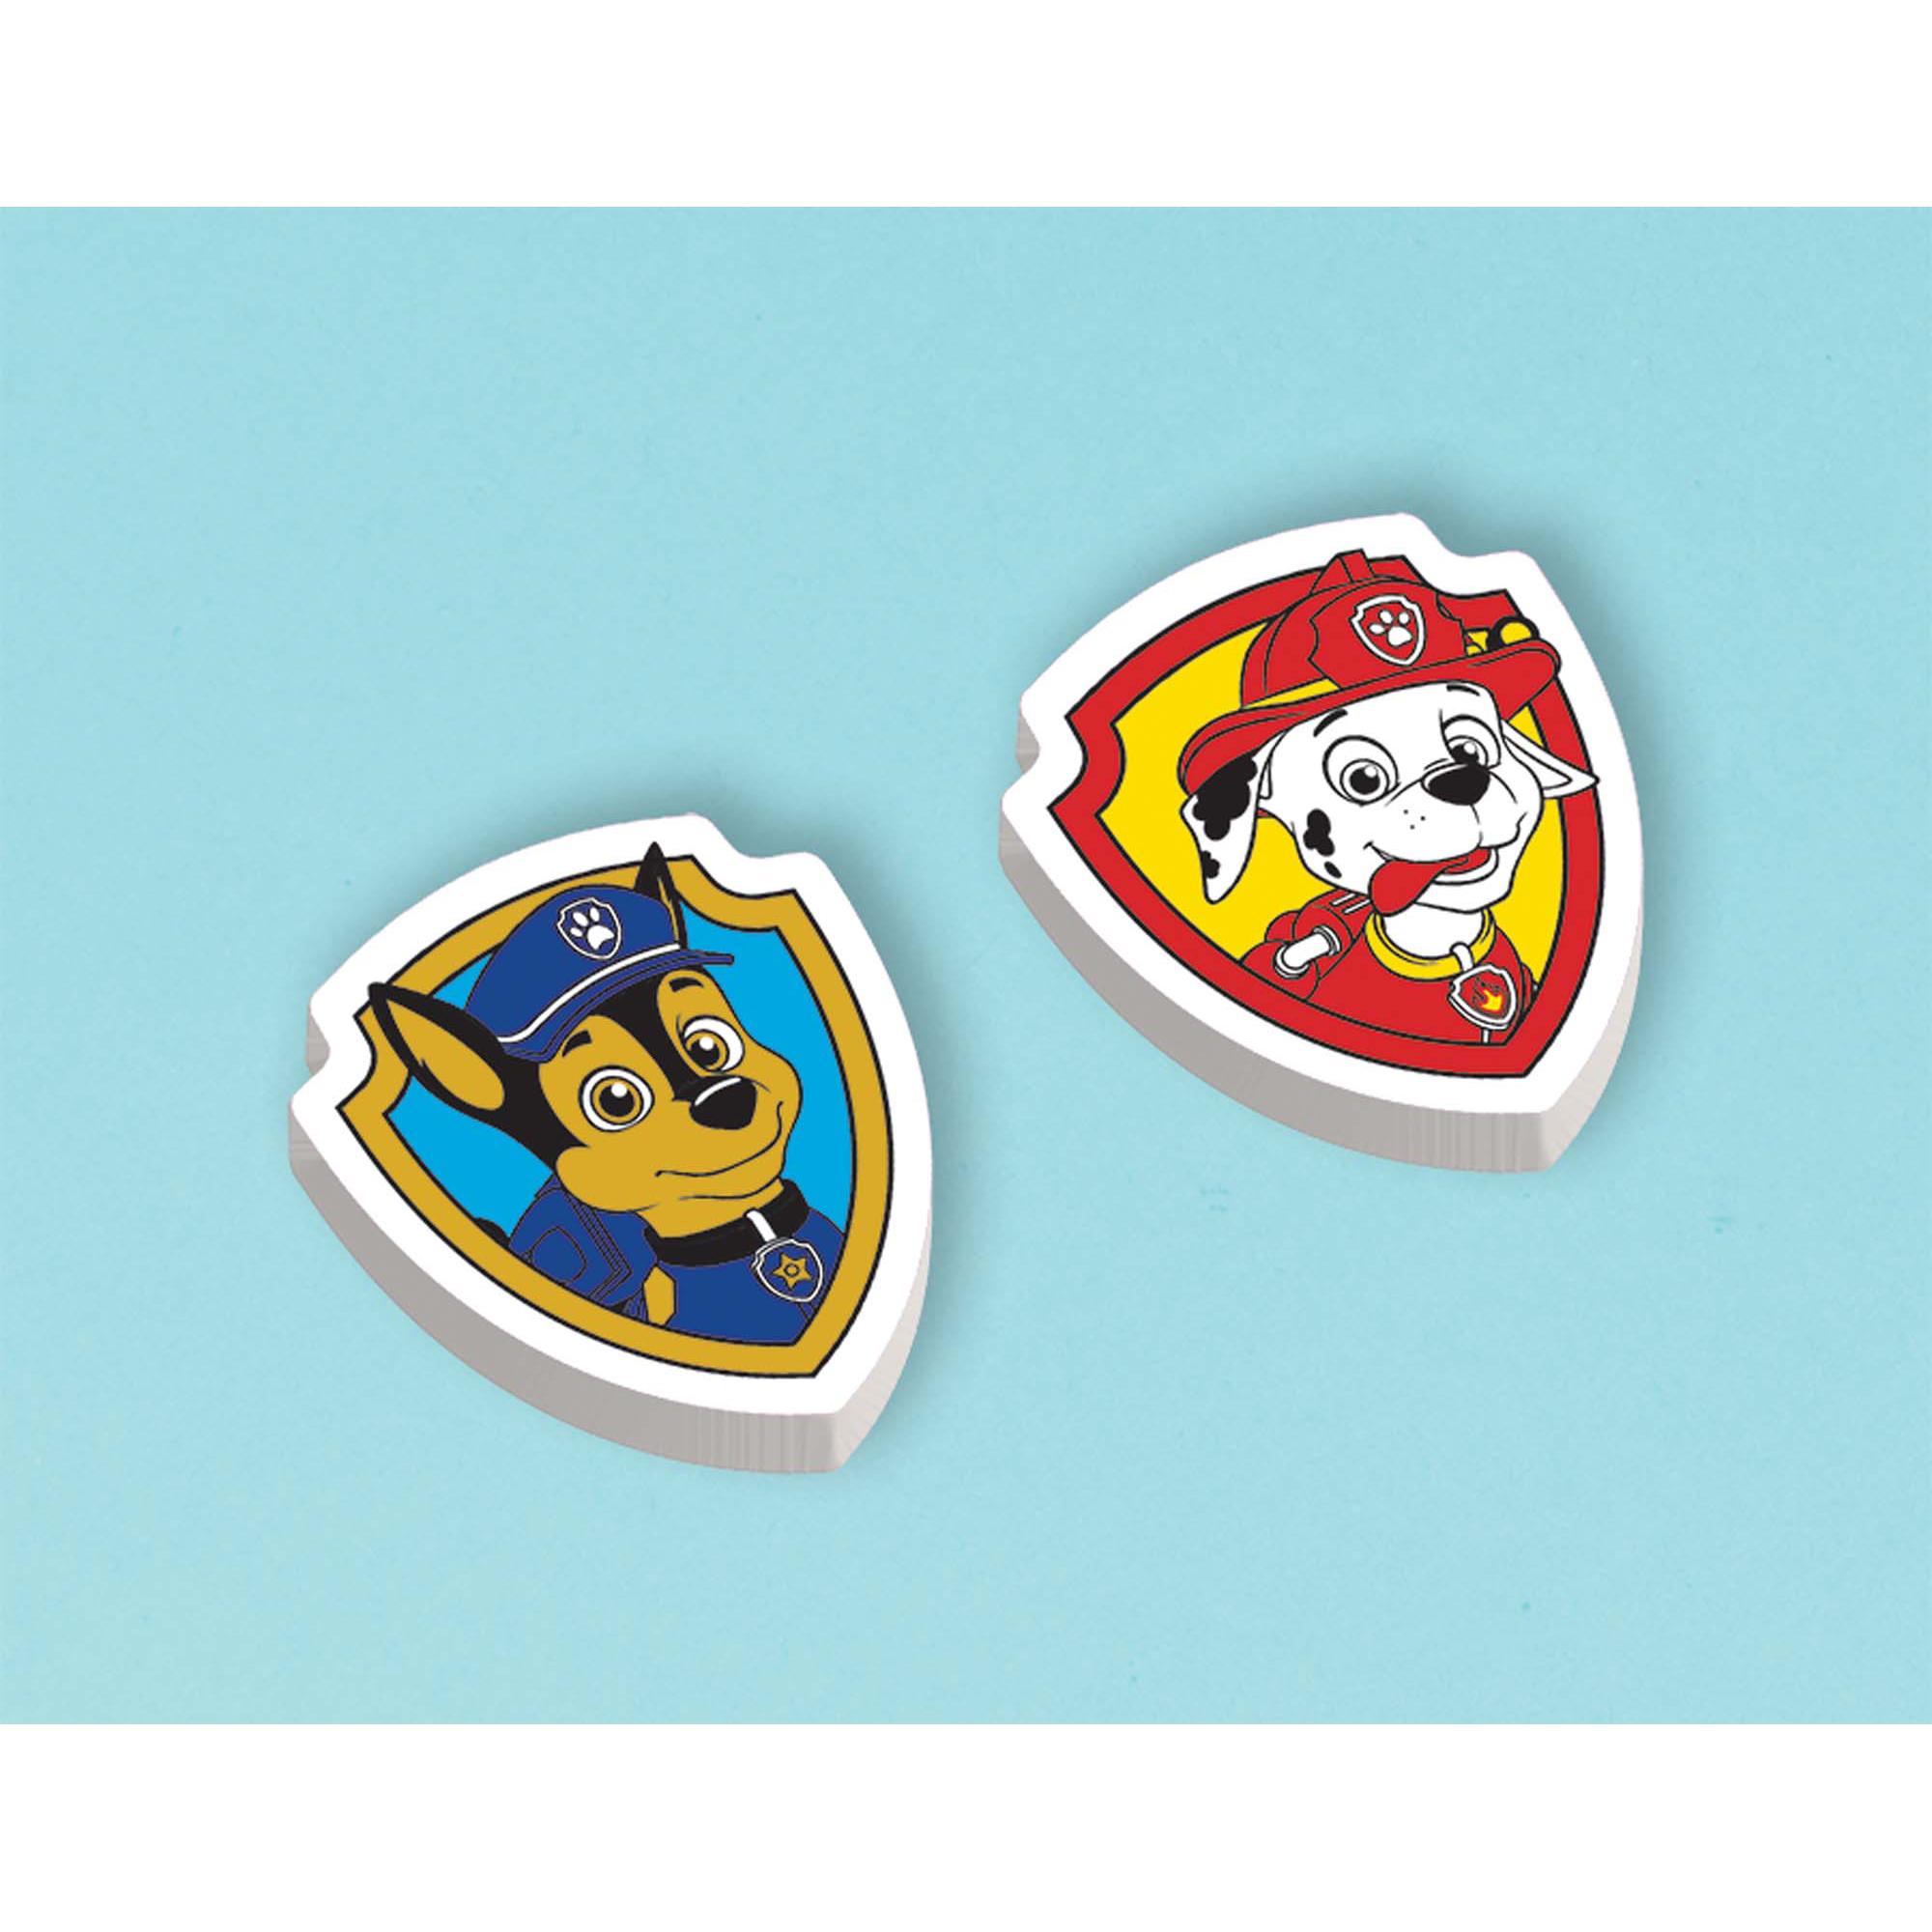 Paw Patrol Shaped Erasers Packaged Favors Party Favors - Party Centre - Party Centre